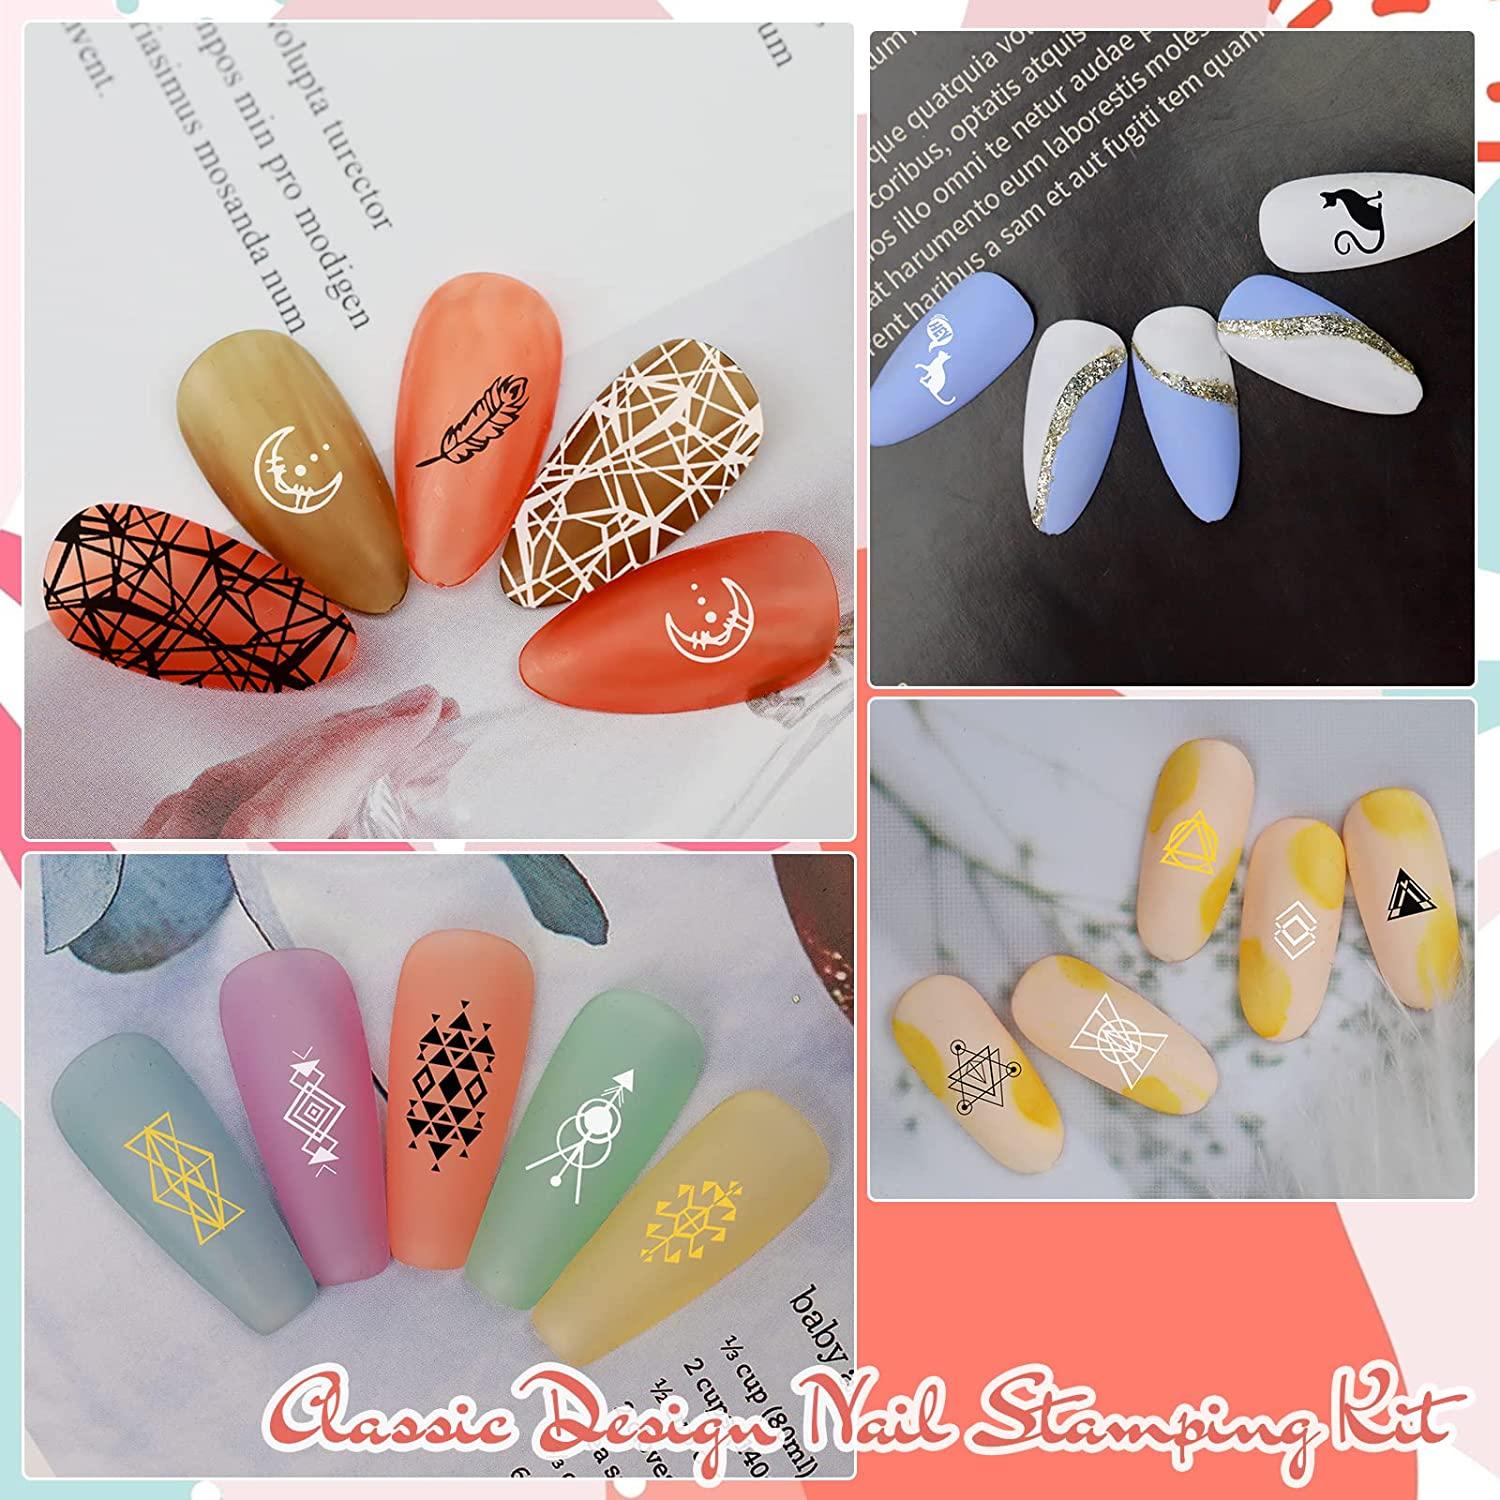 Biutee Nail Stamping Plates Kit 5PCS Nail Art Template Image Plates 8  Colors Nail Stamping Gel Polish Double Head Stampers with Scraper Leaves  Flowers Animals Patterns Manicure Stencils Tools Set